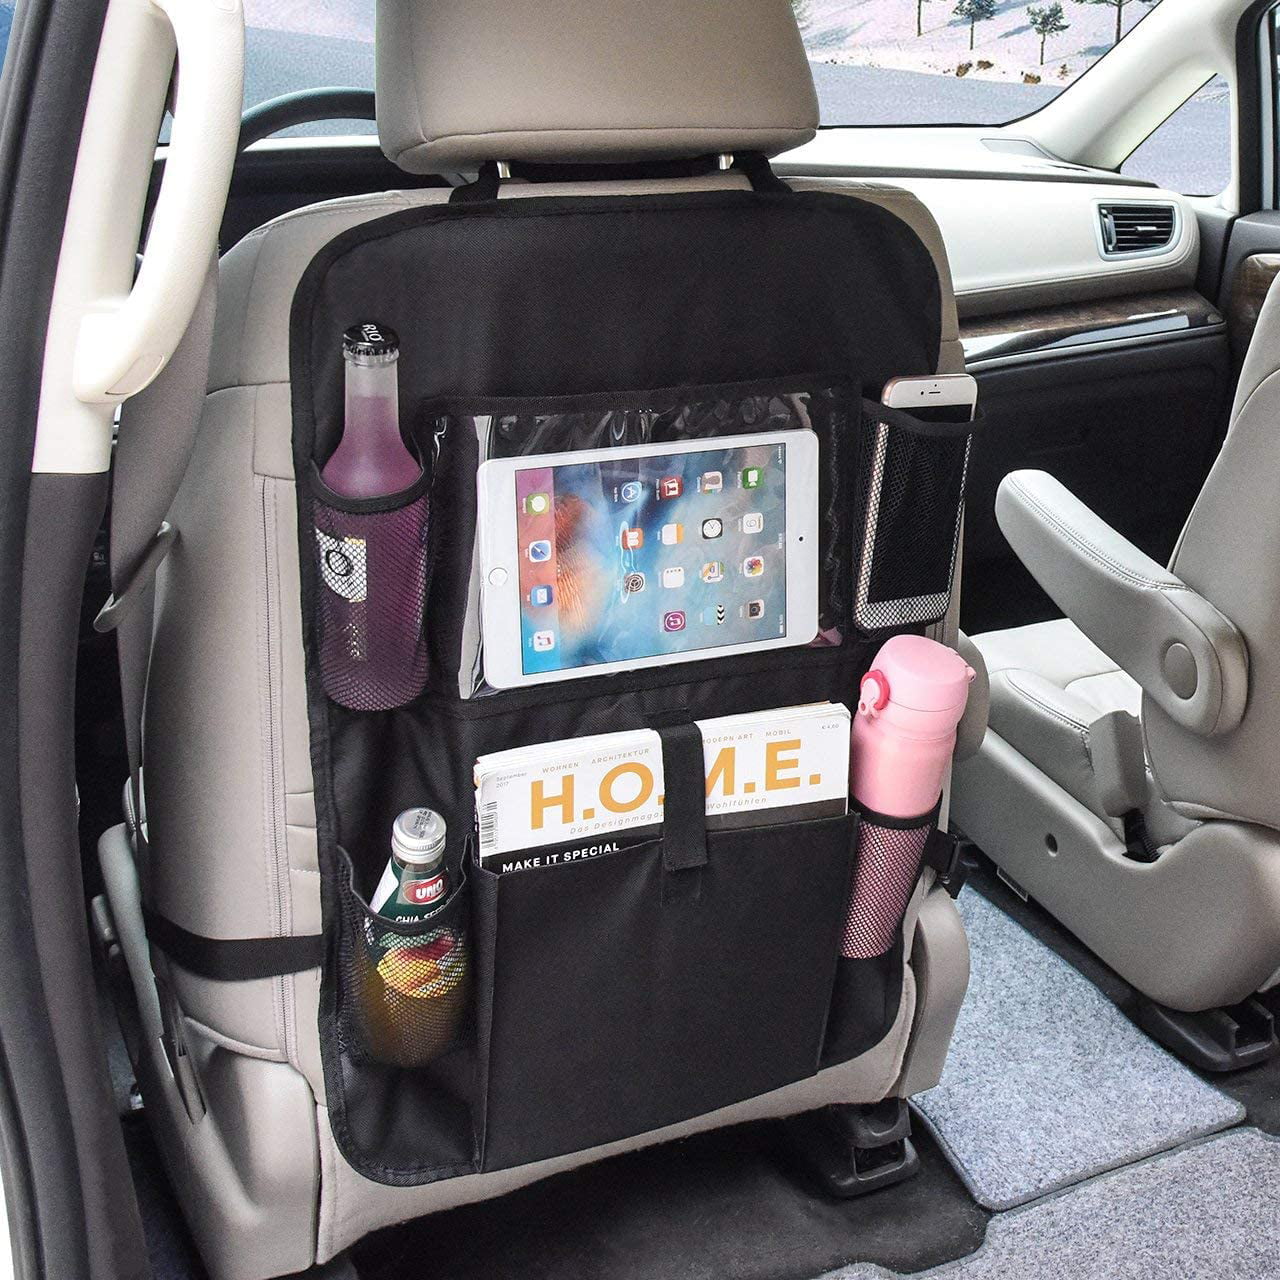 Kick Mats with Organizer - 2 Pack Backseat Protector Seat Covers for Your  Car, SUV, Minivan or Truck Seats - Vehicle Back Seat Kids Safety  Accessories